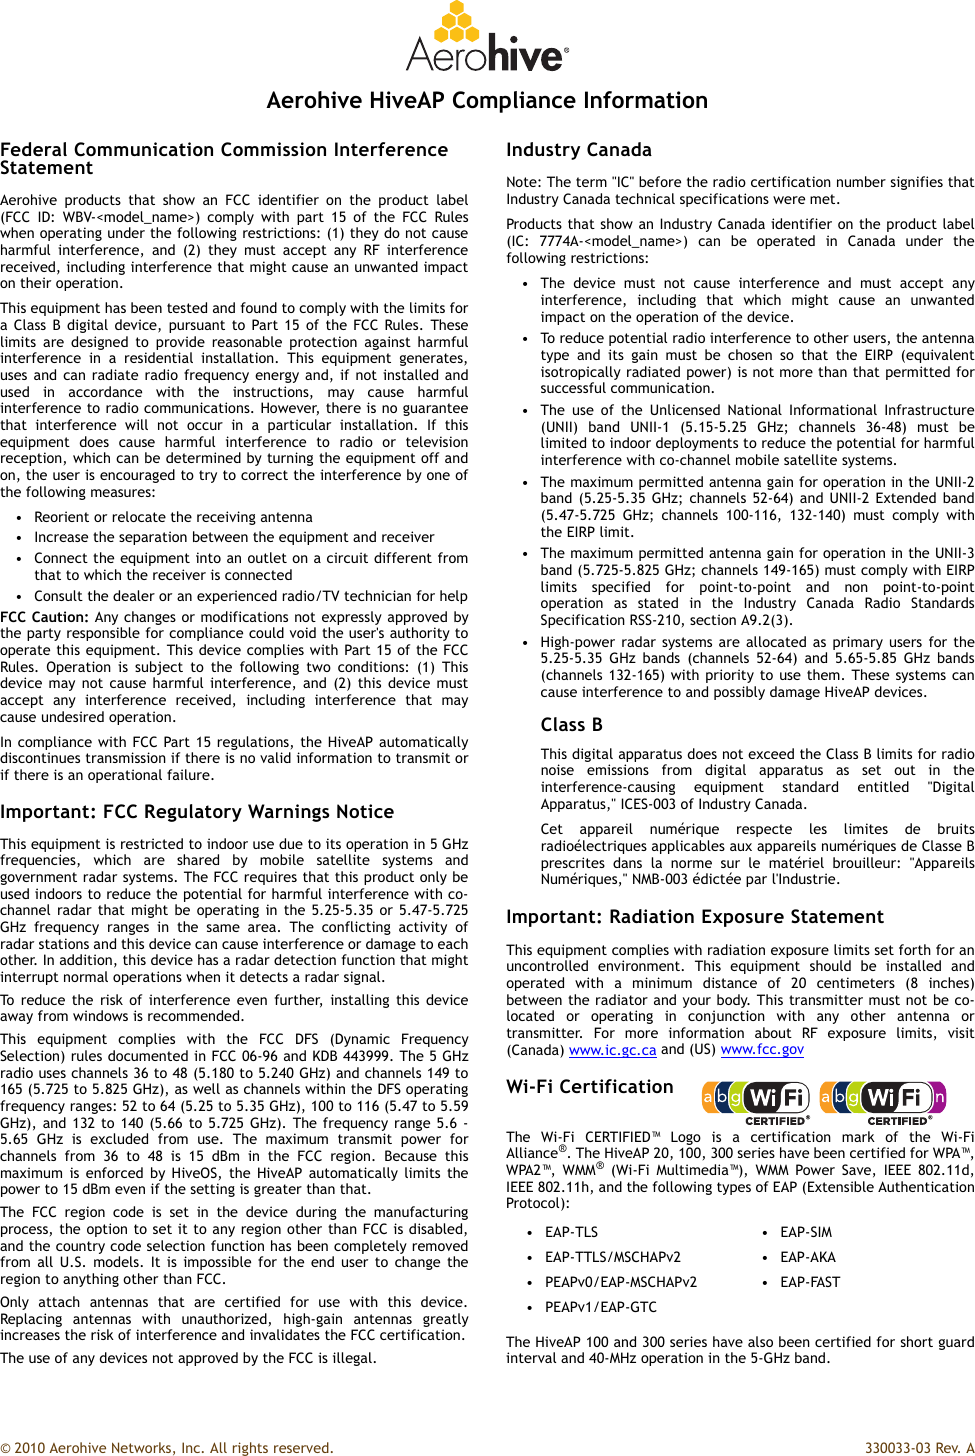 © 2010 Aerohive Networks, Inc. All rights reserved.  330033-03 Rev. AAerohive HiveAP Compliance InformationFederal Communication Commission Interference StatementAerohive products that show an FCC identifier on the product label(FCC ID: WBV-&lt;model_name&gt;) comply with part 15 of the FCC Ruleswhen operating under the following restrictions: (1) they do not causeharmful interference, and (2) they must accept any RF interferencereceived, including interference that might cause an unwanted impacton their operation.This equipment has been tested and found to comply with the limits fora Class B digital device, pursuant to Part 15 of the FCC Rules. Theselimits are designed to provide reasonable protection against harmfulinterference in a residential installation. This equipment generates,uses and can radiate radio frequency energy and, if not installed andused in accordance with the instructions, may cause harmfulinterference to radio communications. However, there is no guaranteethat interference will not occur in a particular installation. If thisequipment does cause harmful interference to radio or televisionreception, which can be determined by turning the equipment off andon, the user is encouraged to try to correct the interference by one ofthe following measures:• Reorient or relocate the receiving antenna• Increase the separation between the equipment and receiver• Connect the equipment into an outlet on a circuit different fromthat to which the receiver is connected• Consult the dealer or an experienced radio/TV technician for helpFCC Caution: Any changes or modifications not expressly approved bythe party responsible for compliance could void the user&apos;s authority tooperate this equipment. This device complies with Part 15 of the FCCRules. Operation is subject to the following two conditions: (1) Thisdevice may not cause harmful interference, and (2) this device mustaccept any interference received, including interference that maycause undesired operation.In compliance with FCC Part 15 regulations, the HiveAP automaticallydiscontinues transmission if there is no valid information to transmit orif there is an operational failure.Important: FCC Regulatory Warnings NoticeThis equipment is restricted to indoor use due to its operation in 5 GHzfrequencies, which are shared by mobile satellite systems andgovernment radar systems. The FCC requires that this product only beused indoors to reduce the potential for harmful interference with co-channel radar that might be operating in the 5.25-5.35 or 5.47-5.725GHz frequency ranges in the same area. The conflicting activity ofradar stations and this device can cause interference or damage to eachother. In addition, this device has a radar detection function that mightinterrupt normal operations when it detects a radar signal.To reduce the risk of interference even further, installing this deviceaway from windows is recommended.This equipment complies with the FCC DFS (Dynamic FrequencySelection) rules documented in FCC 06-96 and KDB 443999. The 5 GHzradio uses channels 36 to 48 (5.180 to 5.240 GHz) and channels 149 to165 (5.725 to 5.825 GHz), as well as channels within the DFS operatingfrequency ranges: 52 to 64 (5.25 to 5.35 GHz), 100 to 116 (5.47 to 5.59GHz), and 132 to 140 (5.66 to 5.725 GHz). The frequency range 5.6 -5.65 GHz is excluded from use. The maximum transmit power forchannels from 36 to 48 is 15 dBm in the FCC region. Because thismaximum is enforced by HiveOS, the HiveAP automatically limits thepower to 15 dBm even if the setting is greater than that.The FCC region code is set in the device during the manufacturingprocess, the option to set it to any region other than FCC is disabled,and the country code selection function has been completely removedfrom all U.S. models. It is impossible for the end user to change theregion to anything other than FCC.Only attach antennas that are certified for use with this device.Replacing antennas with unauthorized, high-gain antennas greatlyincreases the risk of interference and invalidates the FCC certification.The use of any devices not approved by the FCC is illegal.Industry CanadaNote: The term &quot;IC&quot; before the radio certification number signifies thatIndustry Canada technical specifications were met.Products that show an Industry Canada identifier on the product label(IC: 7774A-&lt;model_name&gt;) can be operated in Canada under thefollowing restrictions:• The device must not cause interference and must accept anyinterference, including that which might cause an unwantedimpact on the operation of the device.• To reduce potential radio interference to other users, the antennatype and its gain must be chosen so that the EIRP (equivalentisotropically radiated power) is not more than that permitted forsuccessful communication.• The use of the Unlicensed National Informational Infrastructure(UNII) band UNII-1 (5.15-5.25 GHz; channels 36-48) must belimited to indoor deployments to reduce the potential for harmfulinterference with co-channel mobile satellite systems.• The maximum permitted antenna gain for operation in the UNII-2band (5.25-5.35 GHz; channels 52-64) and UNII-2 Extended band(5.47-5.725 GHz; channels 100-116, 132-140) must comply withthe EIRP limit.• The maximum permitted antenna gain for operation in the UNII-3band (5.725-5.825 GHz; channels 149-165) must comply with EIRPlimits specified for point-to-point and non point-to-pointoperation as stated in the Industry Canada Radio StandardsSpecification RSS-210, section A9.2(3).• High-power radar systems are allocated as primary users for the5.25-5.35 GHz bands (channels 52-64) and 5.65-5.85 GHz bands(channels 132-165) with priority to use them. These systems cancause interference to and possibly damage HiveAP devices.Class BThis digital apparatus does not exceed the Class B limits for radionoise emissions from digital apparatus as set out in theinterference-causing equipment standard entitled &quot;DigitalApparatus,&quot; ICES-003 of Industry Canada.Cet appareil numérique respecte les limites de bruitsradioélectriques applicables aux appareils numériques de Classe Bprescrites dans la norme sur le matériel brouilleur: &quot;AppareilsNumériques,&quot; NMB-003 édictée par l&apos;Industrie.Important: Radiation Exposure StatementThis equipment complies with radiation exposure limits set forth for anuncontrolled environment. This equipment should be installed andoperated with a minimum distance of 20 centimeters (8 inches)between the radiator and your body. This transmitter must not be co-located or operating in conjunction with any other antenna ortransmitter. For more information about RF exposure limits, visit(Canada) www.ic.gc.ca and (US) www.fcc.govWi-Fi CertificationThe Wi-Fi CERTIFIED™ Logo is a certification mark of the Wi-FiAlliance®. The HiveAP 20, 100, 300 series have been certified for WPA™,WPA2™, WMM® (Wi-Fi Multimedia™), WMM Power Save, IEEE 802.11d,IEEE 802.11h, and the following types of EAP (Extensible AuthenticationProtocol):The HiveAP 100 and 300 series have also been certified for short guardinterval and 40-MHz operation in the 5-GHz band.•EAP-TLS •EAP-SIM•EAP-TTLS/MSCHAPv2 •EAP-AKA• PEAPv0/EAP-MSCHAPv2 • EAP-FAST• PEAPv1/EAP-GTC